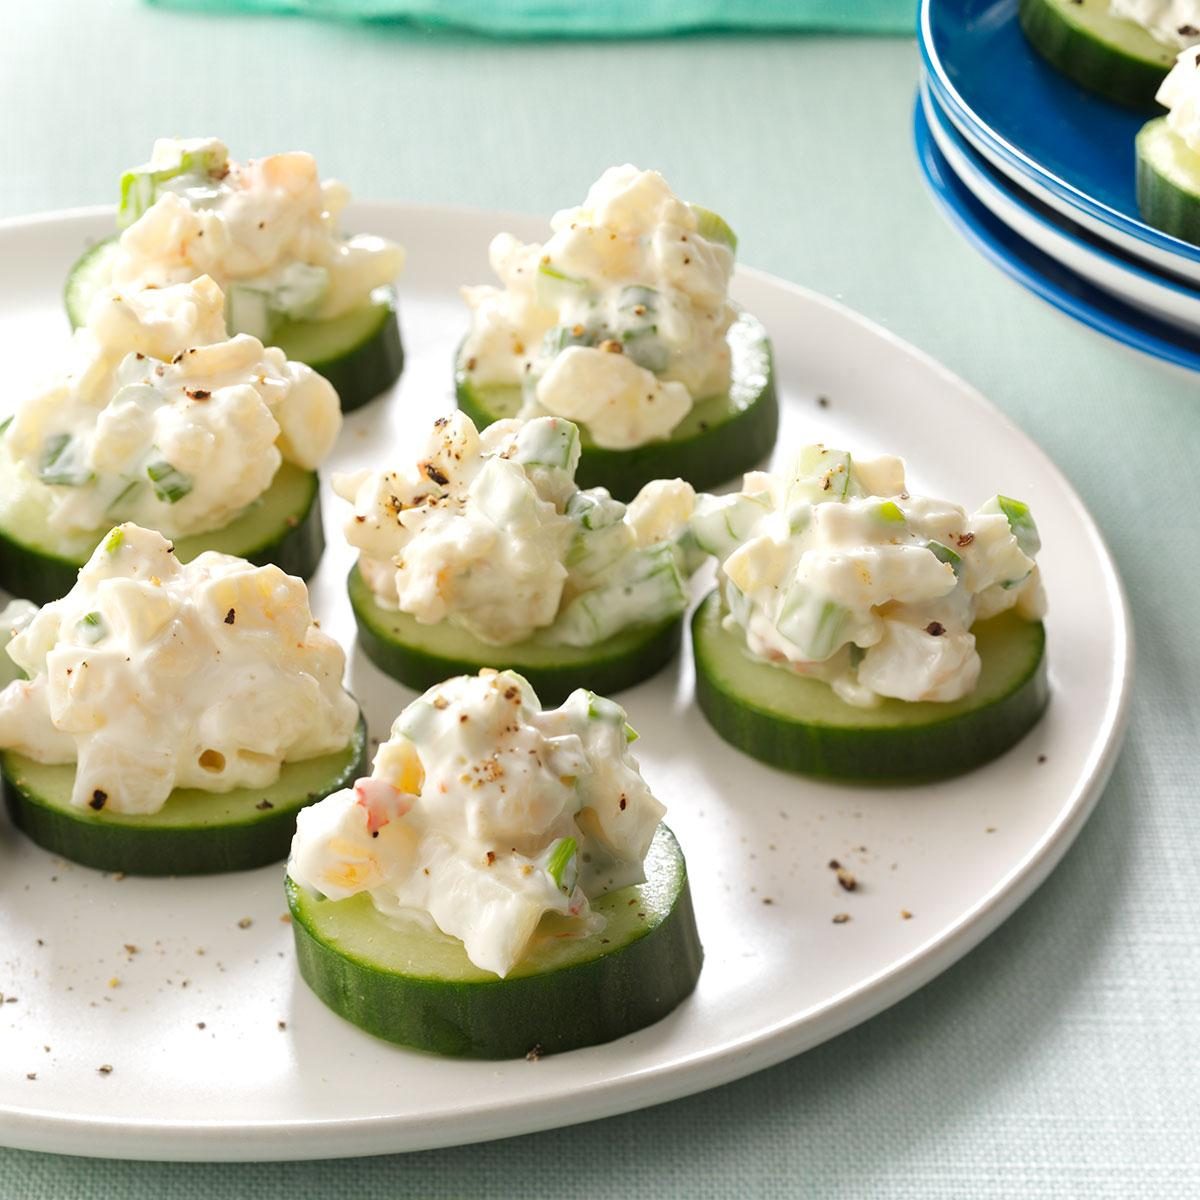 What are some good cold appetizer recipes?